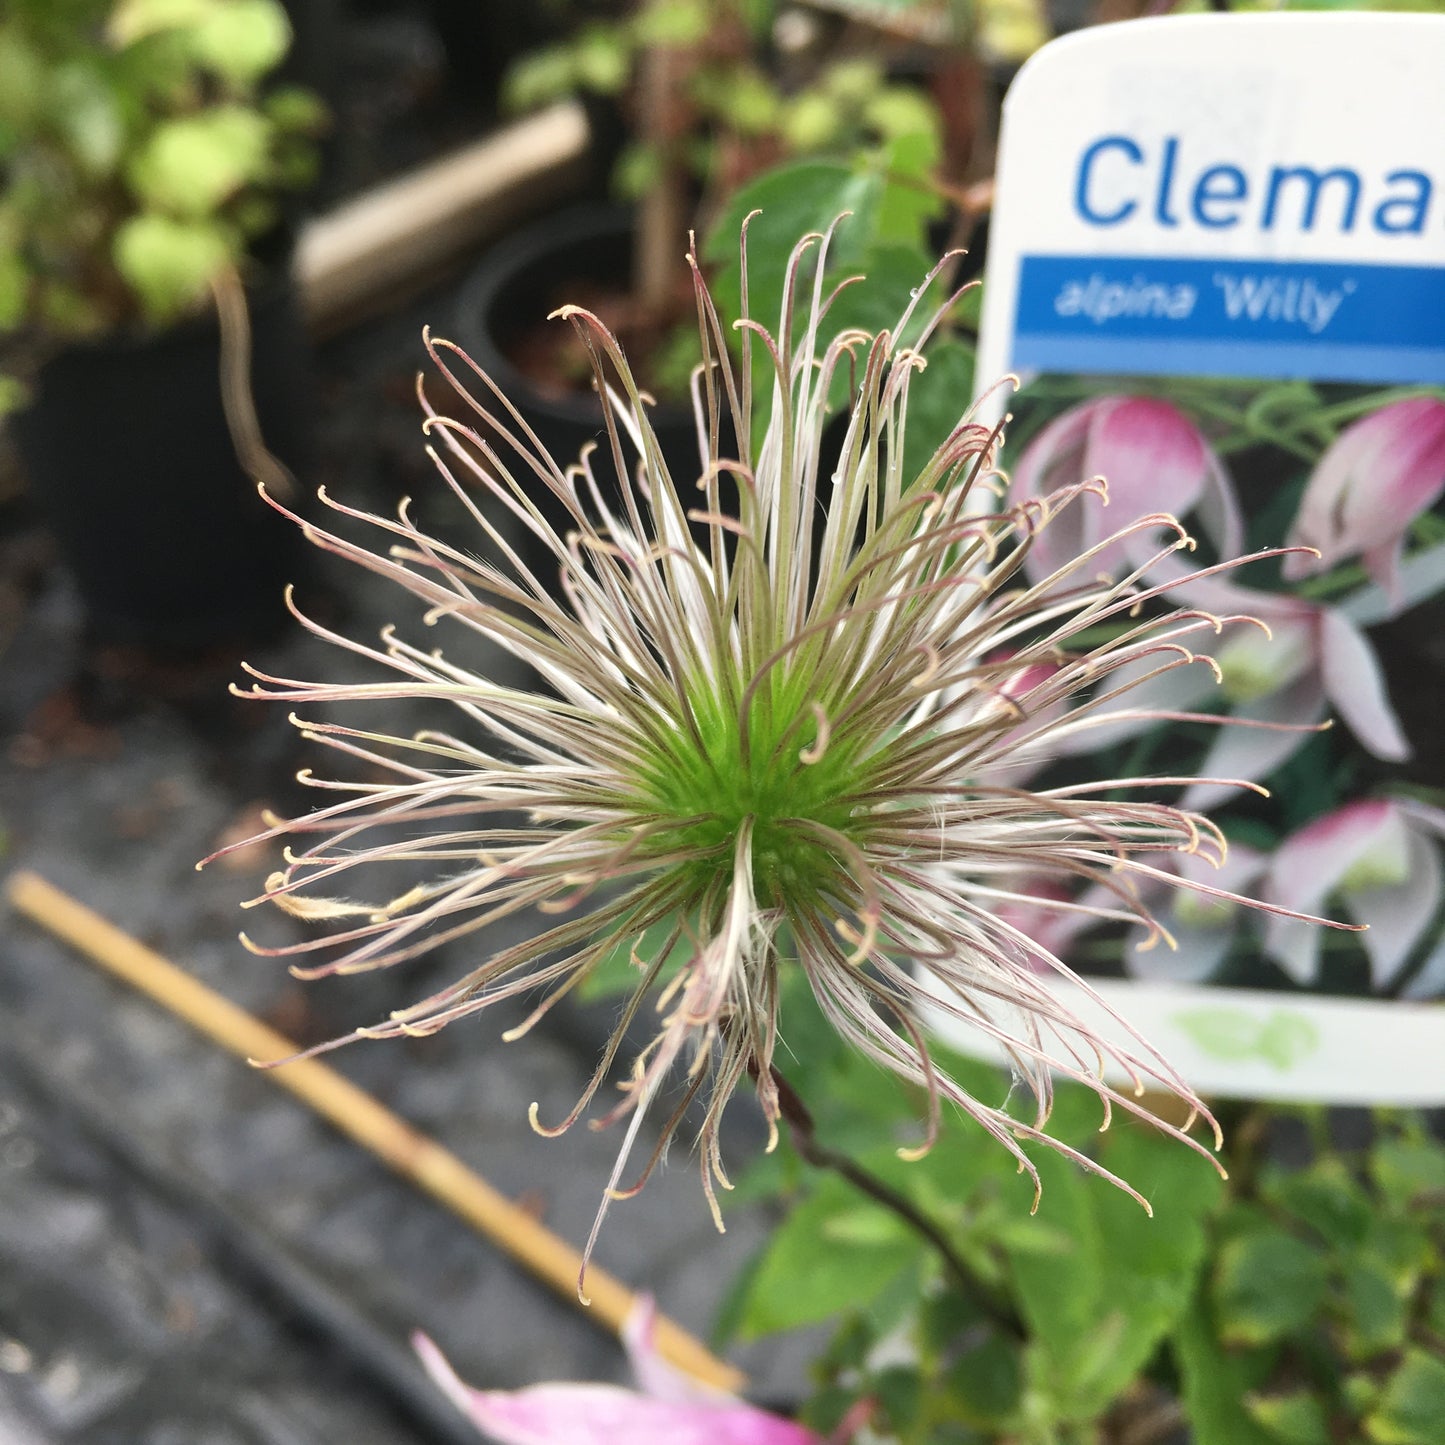 Clematis alpina 'Willy' Large 2L Climber Plant